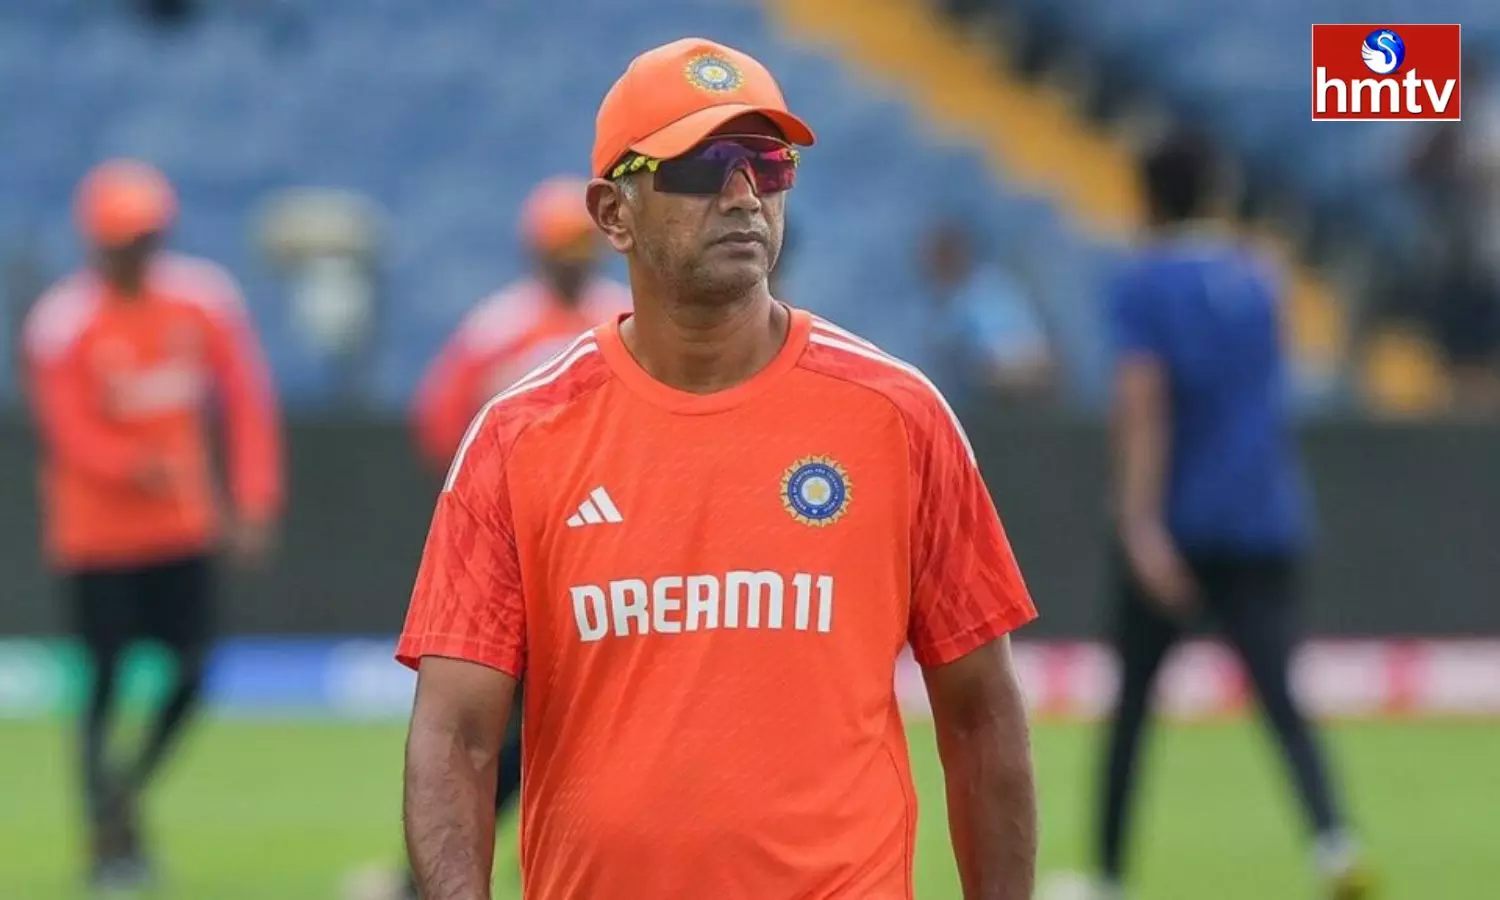 Rahul Dravid Is Once Again The Head Coach Of The Indian Cricket Team